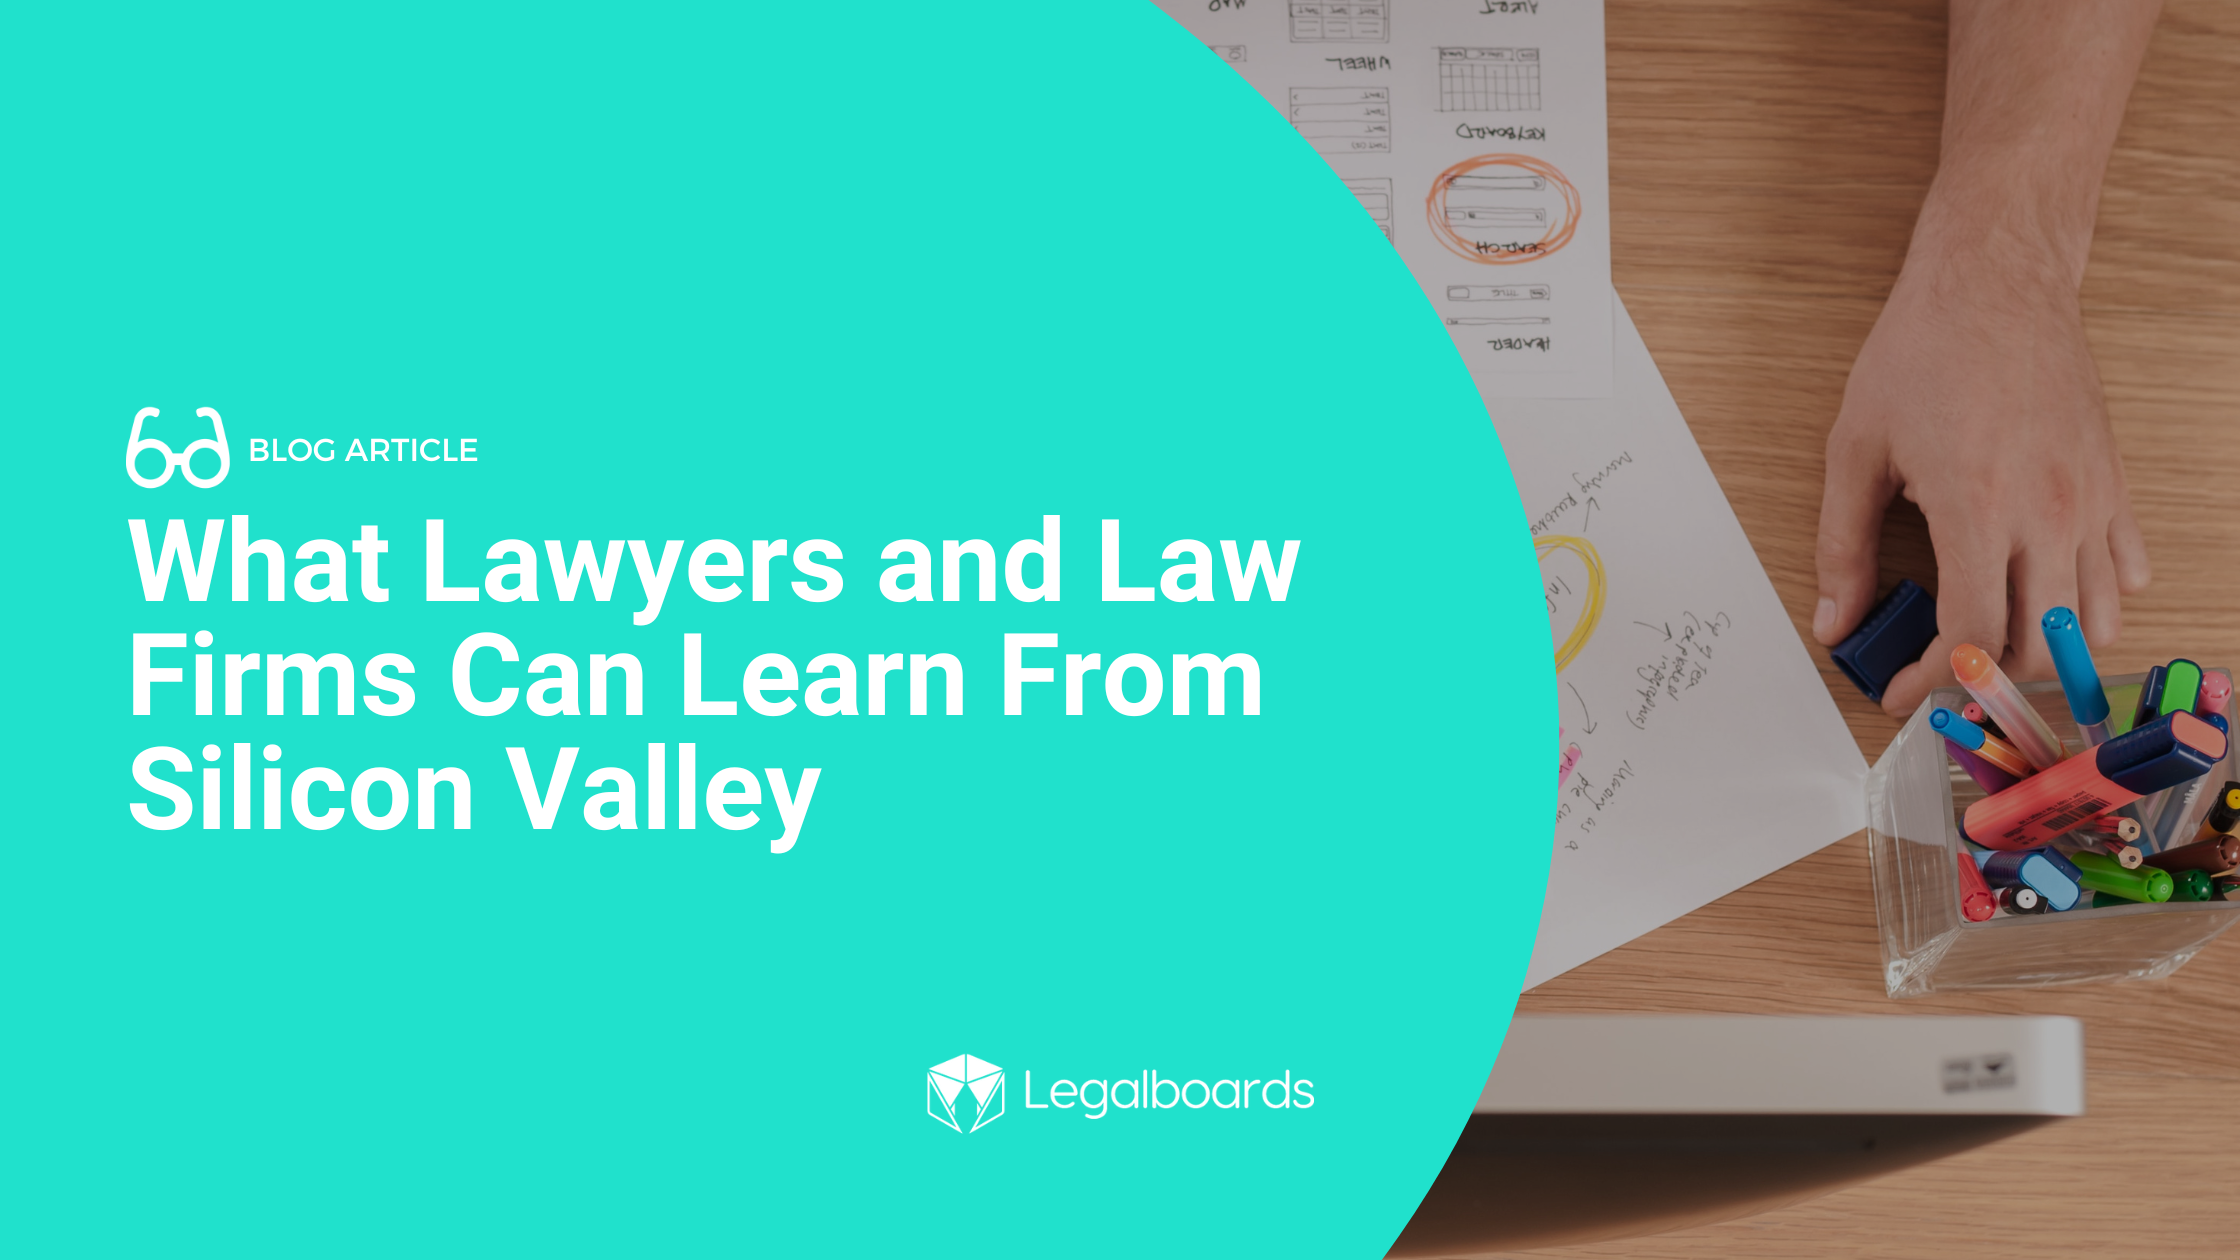 What lawyers and law firms an learn from Silicon Valley